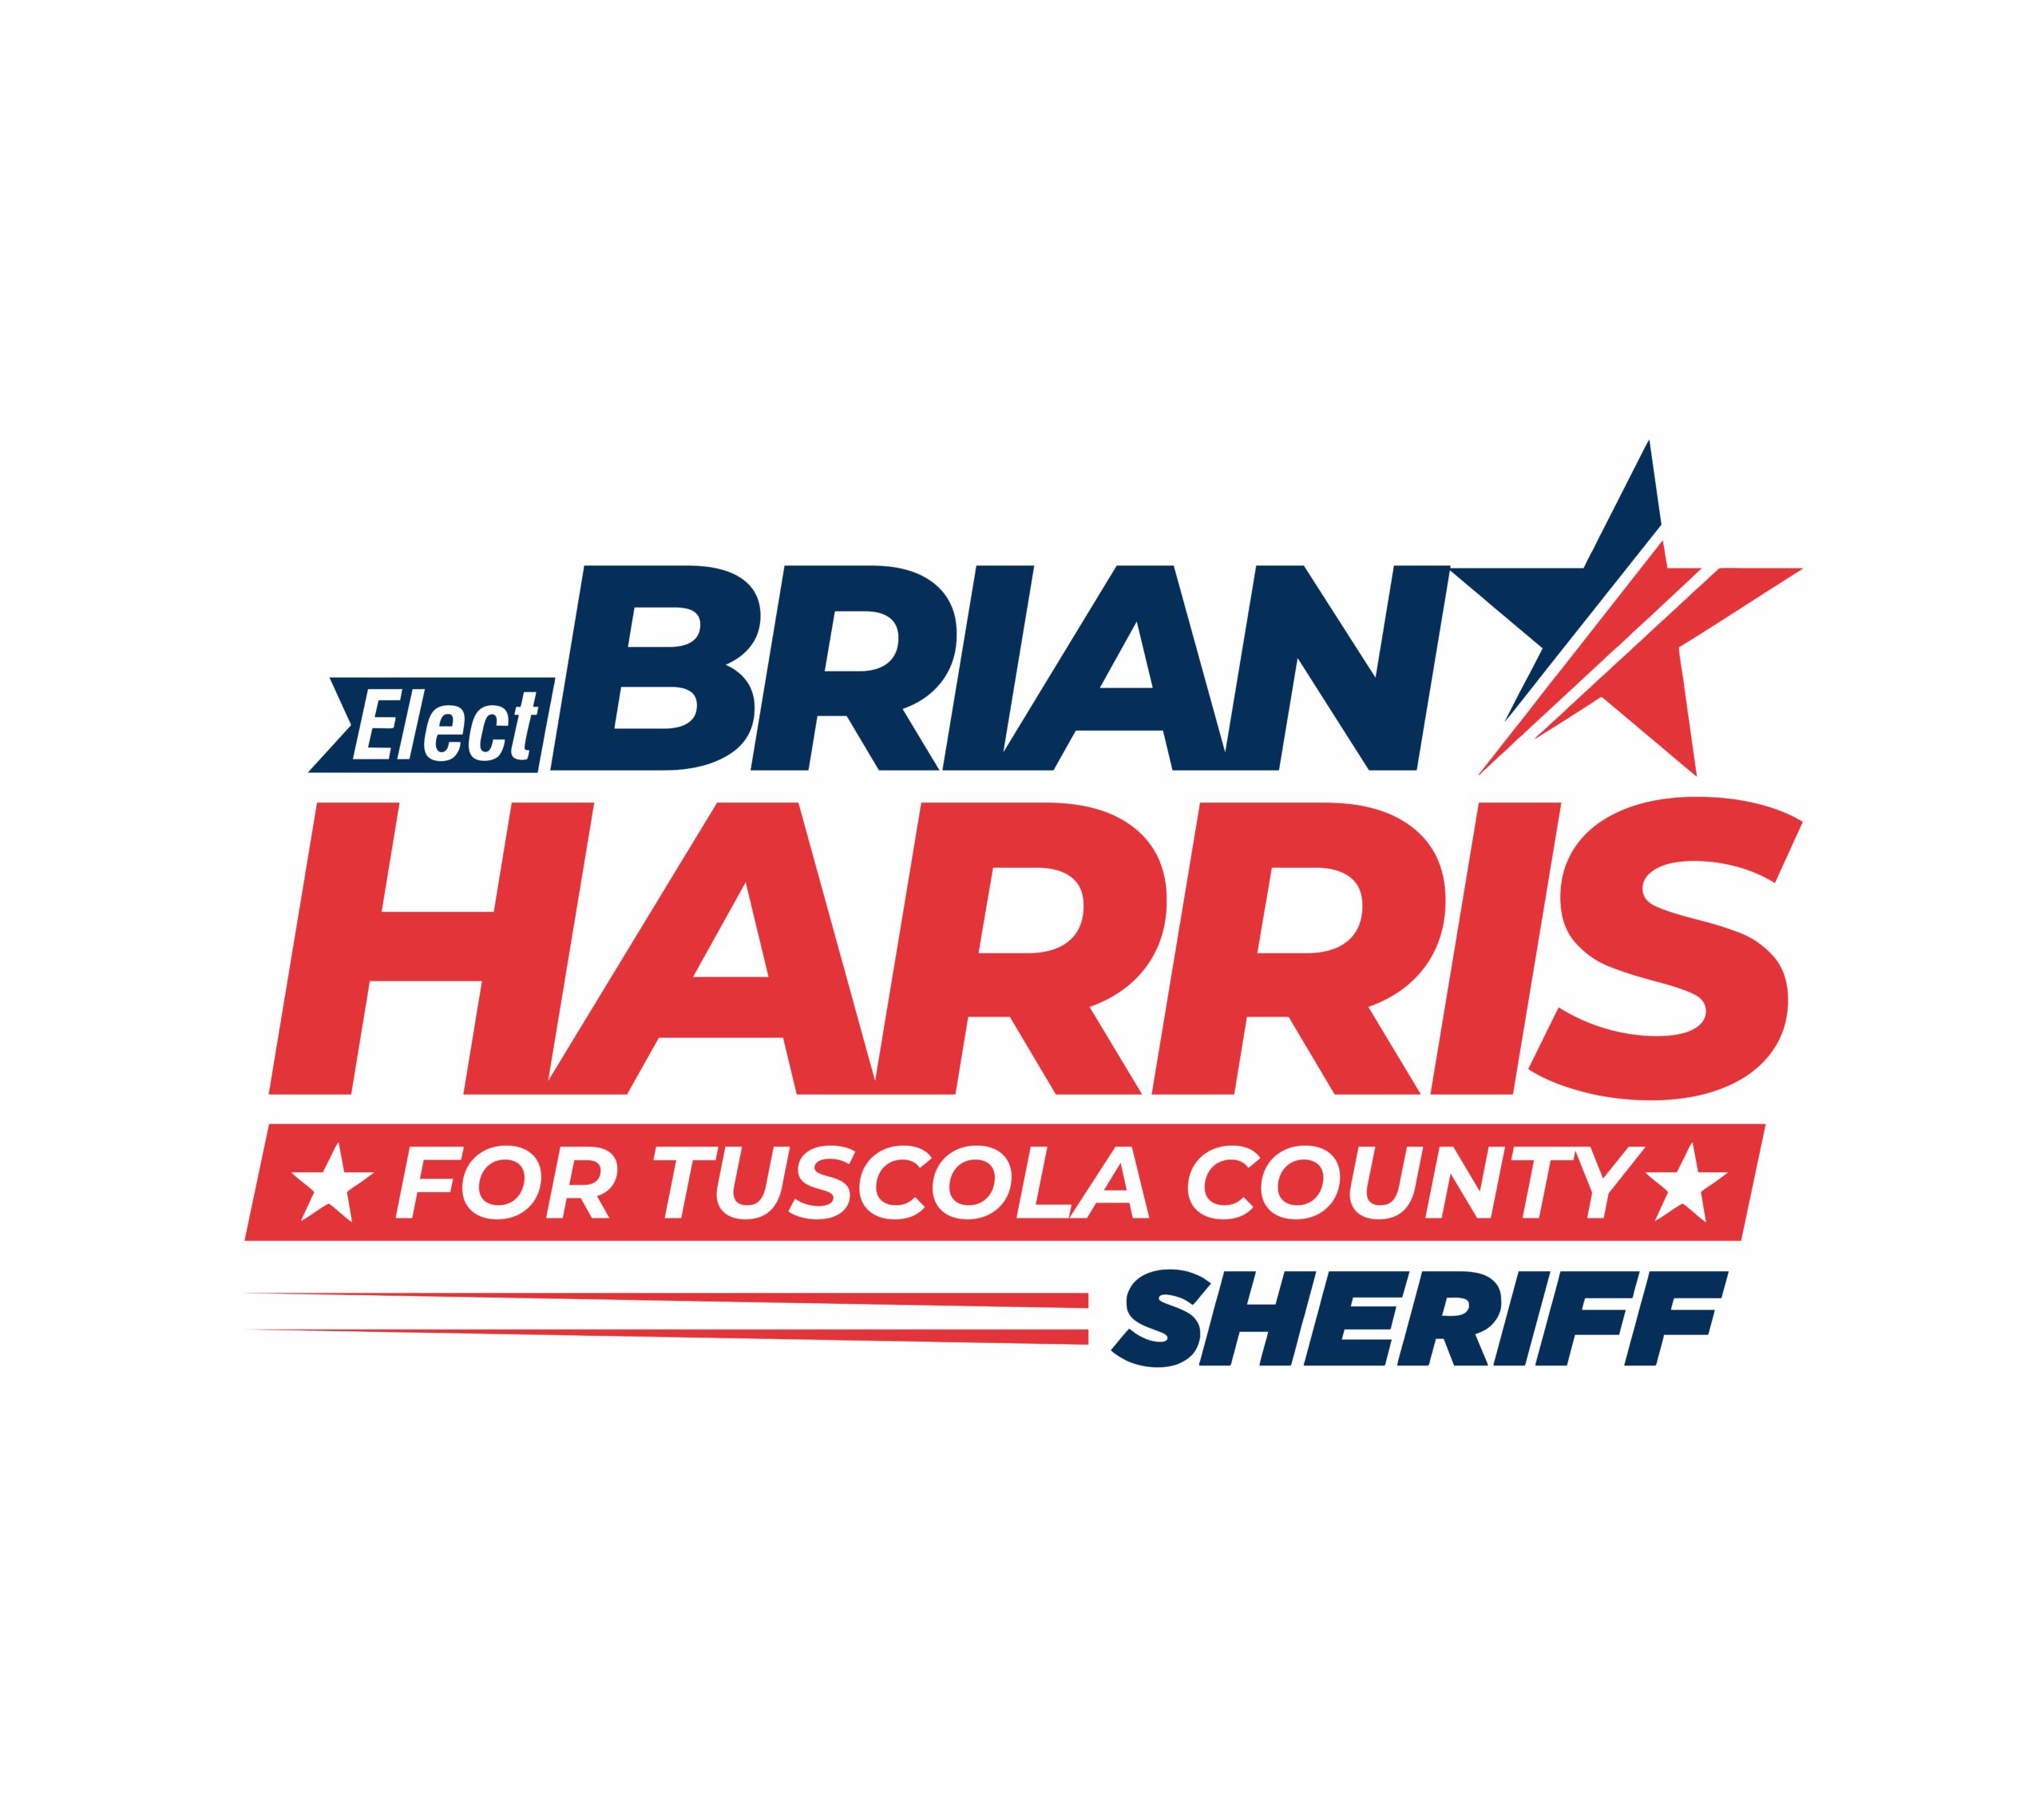 Elect Brian Harris for Tuscola County Sheriff